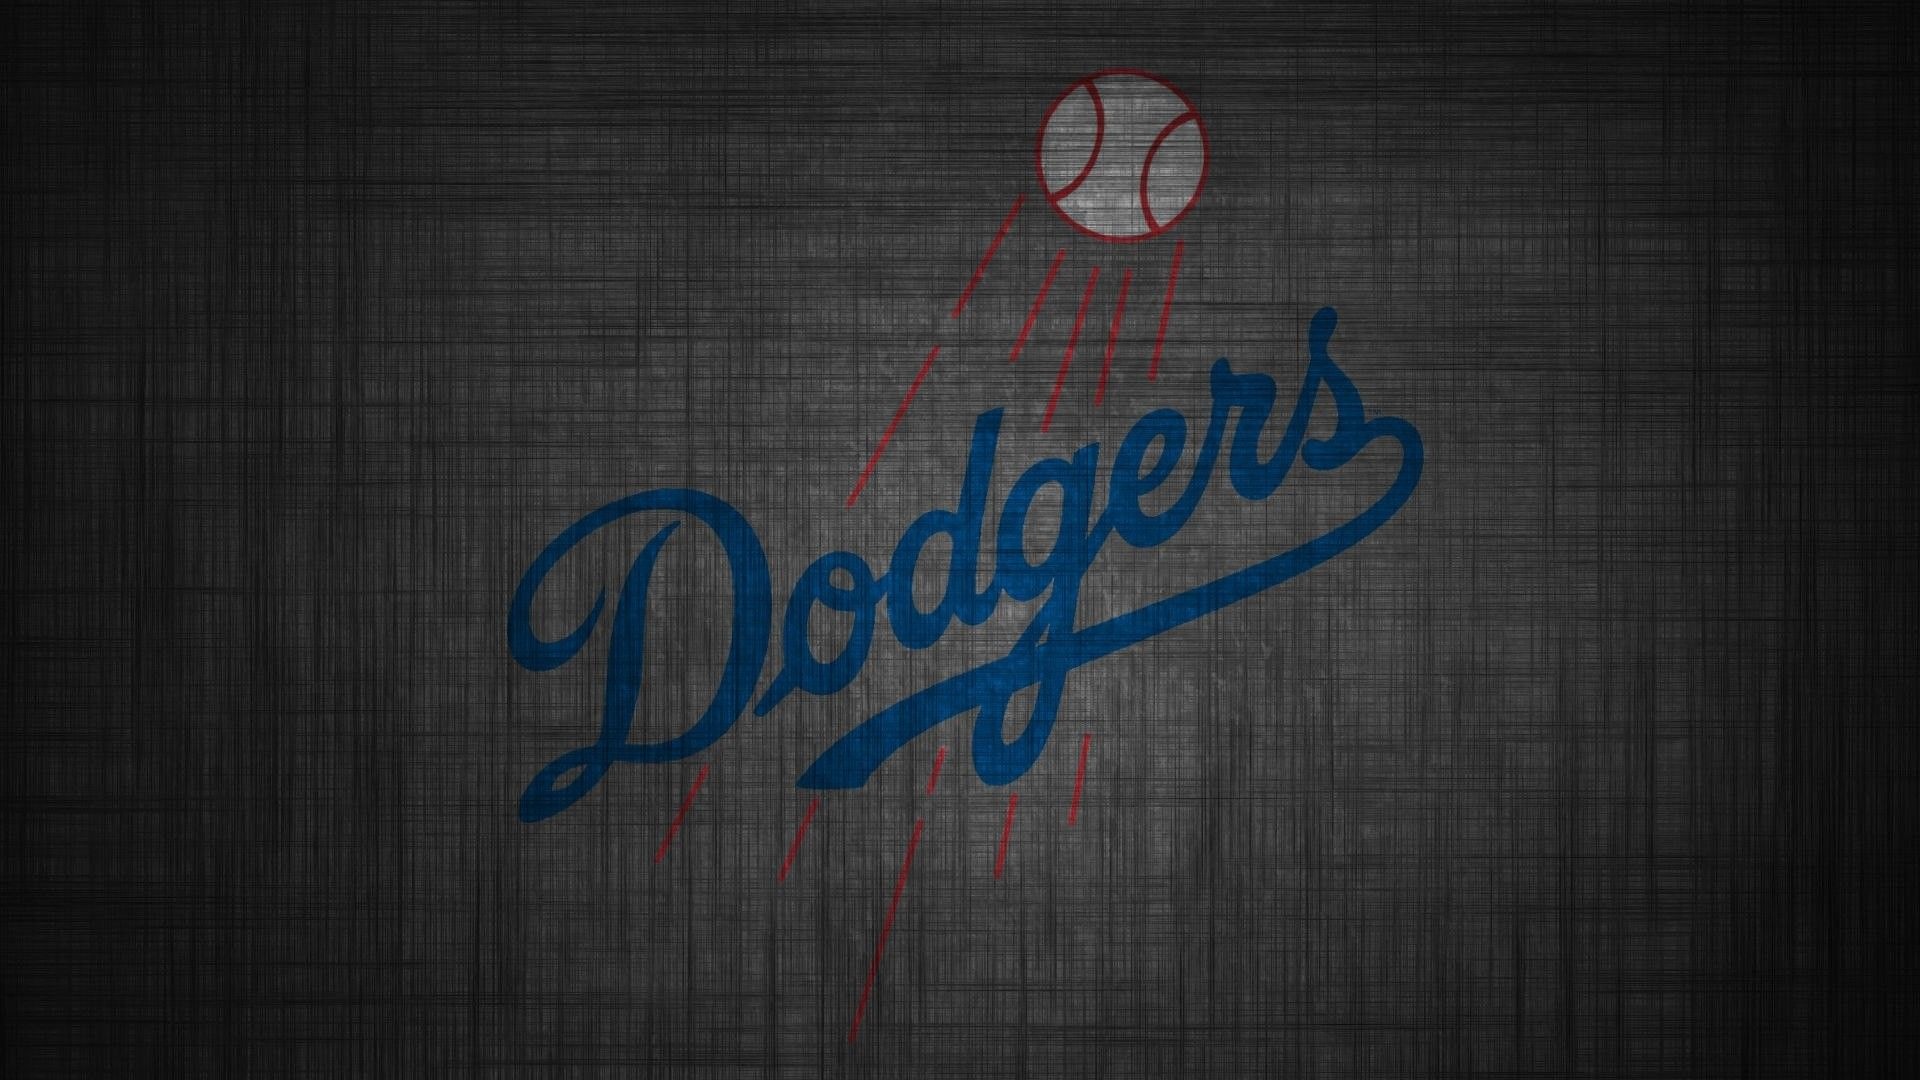 LA Dodgers wallpapers, Top free backgrounds, Sports team pride, Iconic franchise, 1920x1080 Full HD Desktop